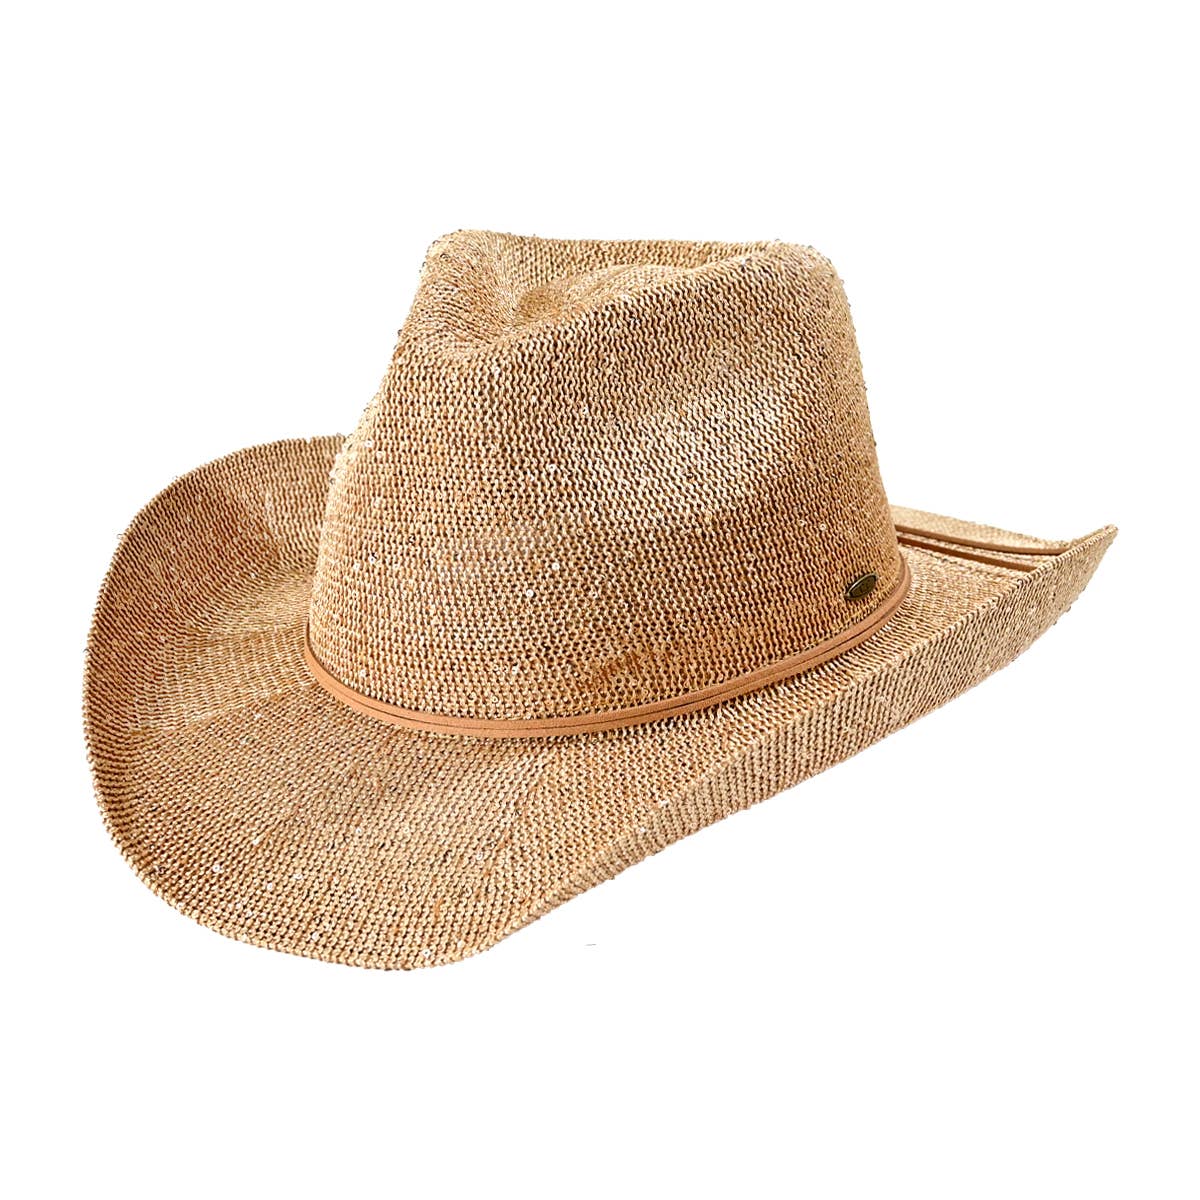 Sequin Cowboy Hat with Suede String